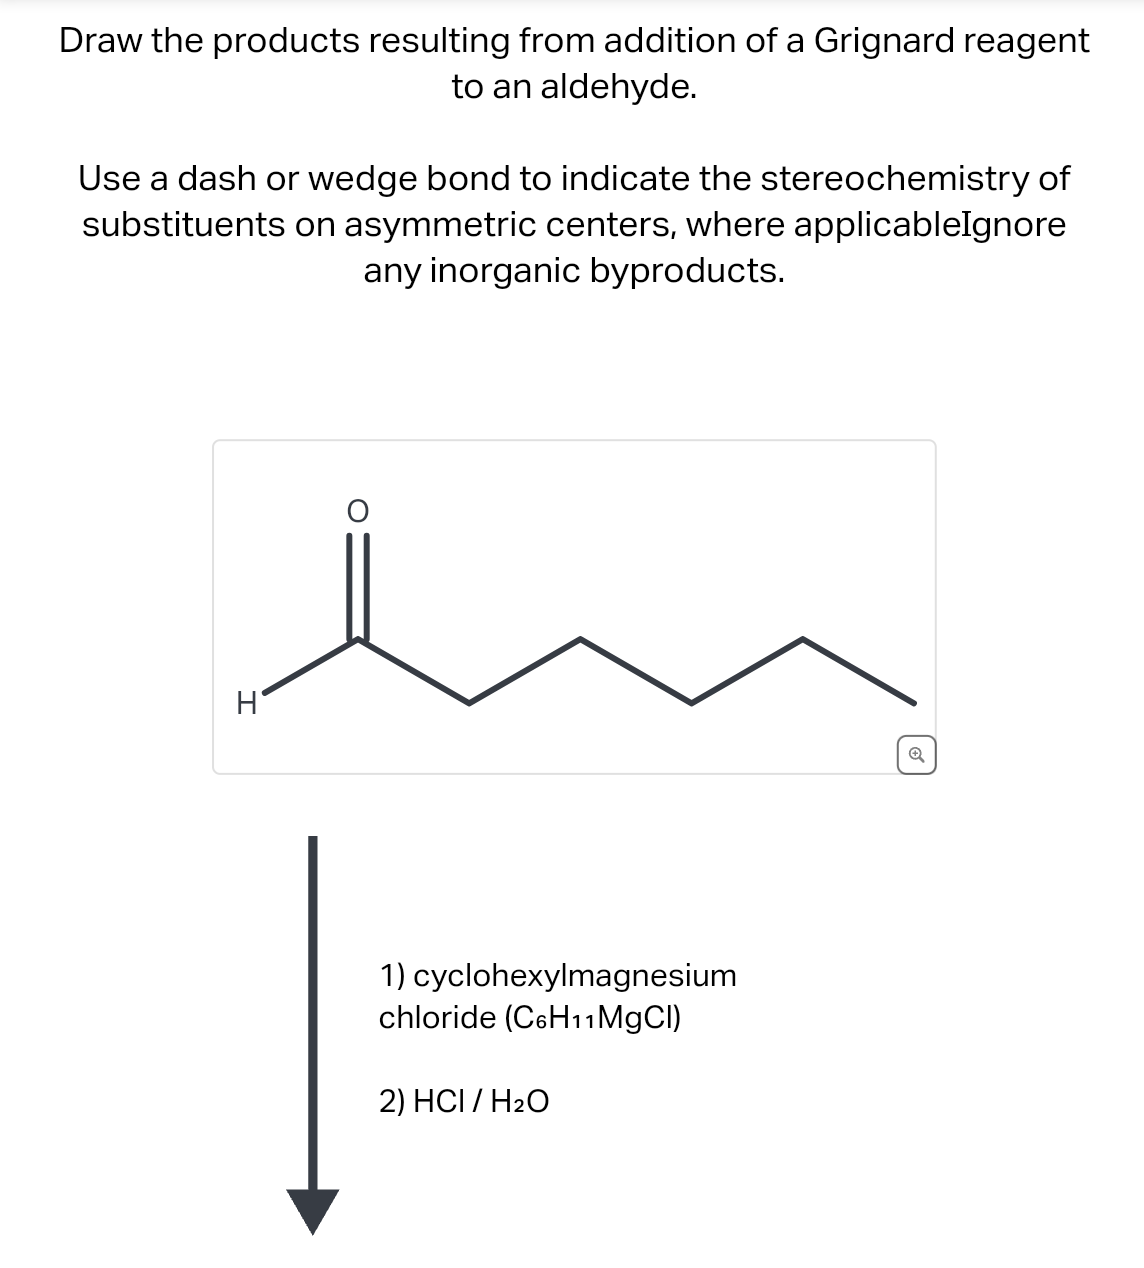 Draw the products resulting from addition of a Grignard reagent
to an aldehyde.
Use a dash or wedge bond to indicate the stereochemistry of
substituents on asymmetric centers, where applicableIgnore
any inorganic byproducts.
H
1) cyclohexylmagnesium
chloride (C6H11MgCl)
2) HCI / H₂O
Q